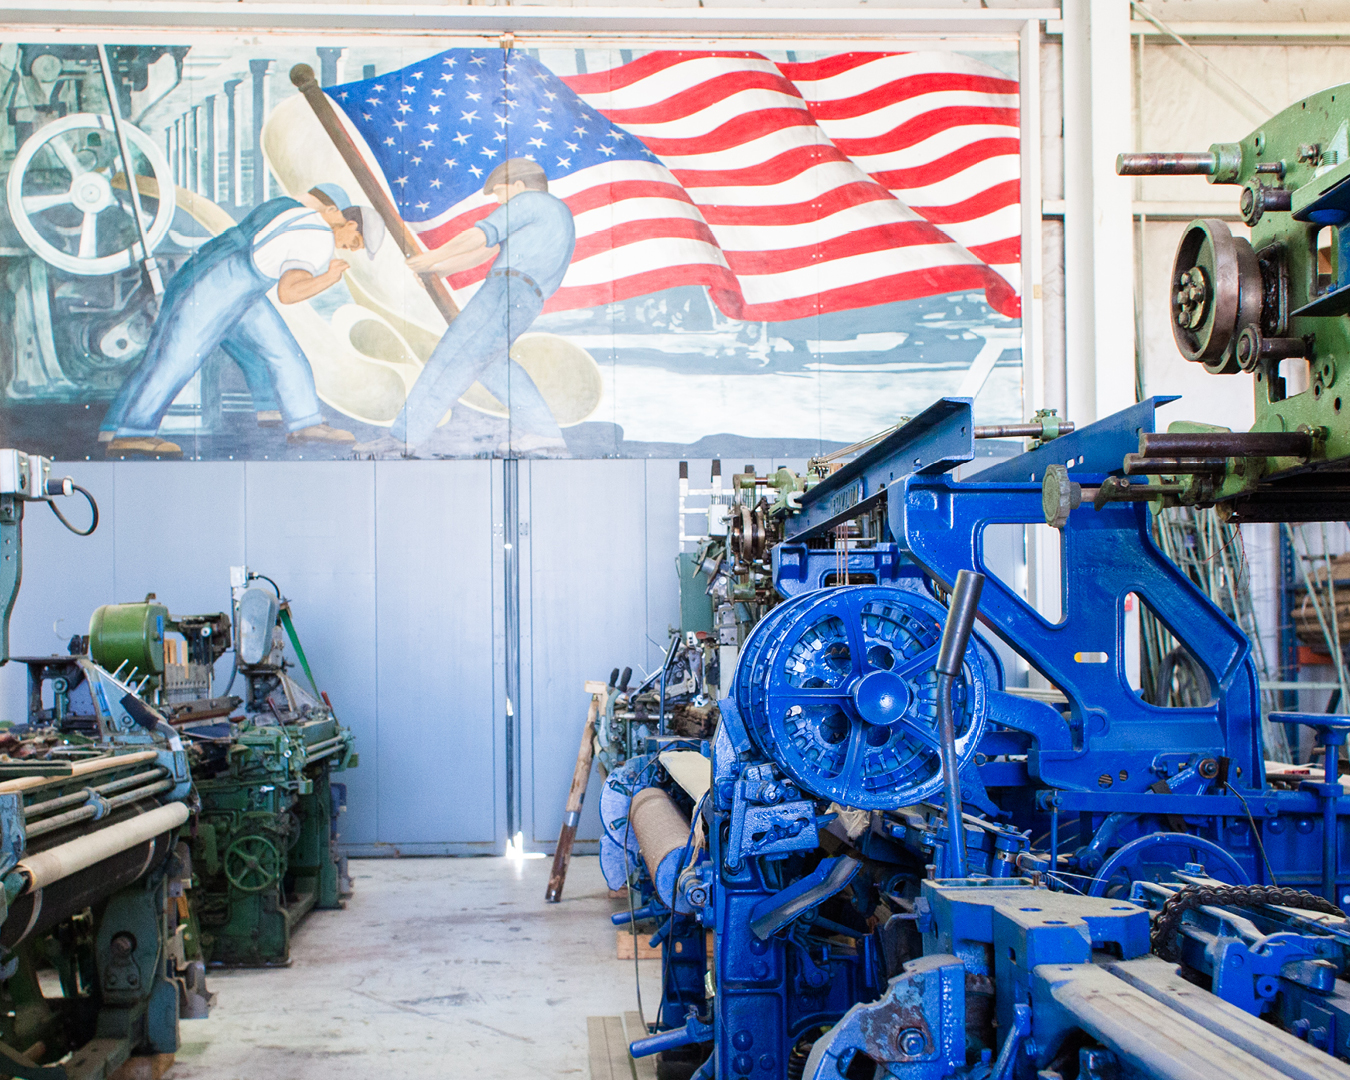 color-photograph-green-and-blue-mechanical-looms-below-large-american-flag-mural